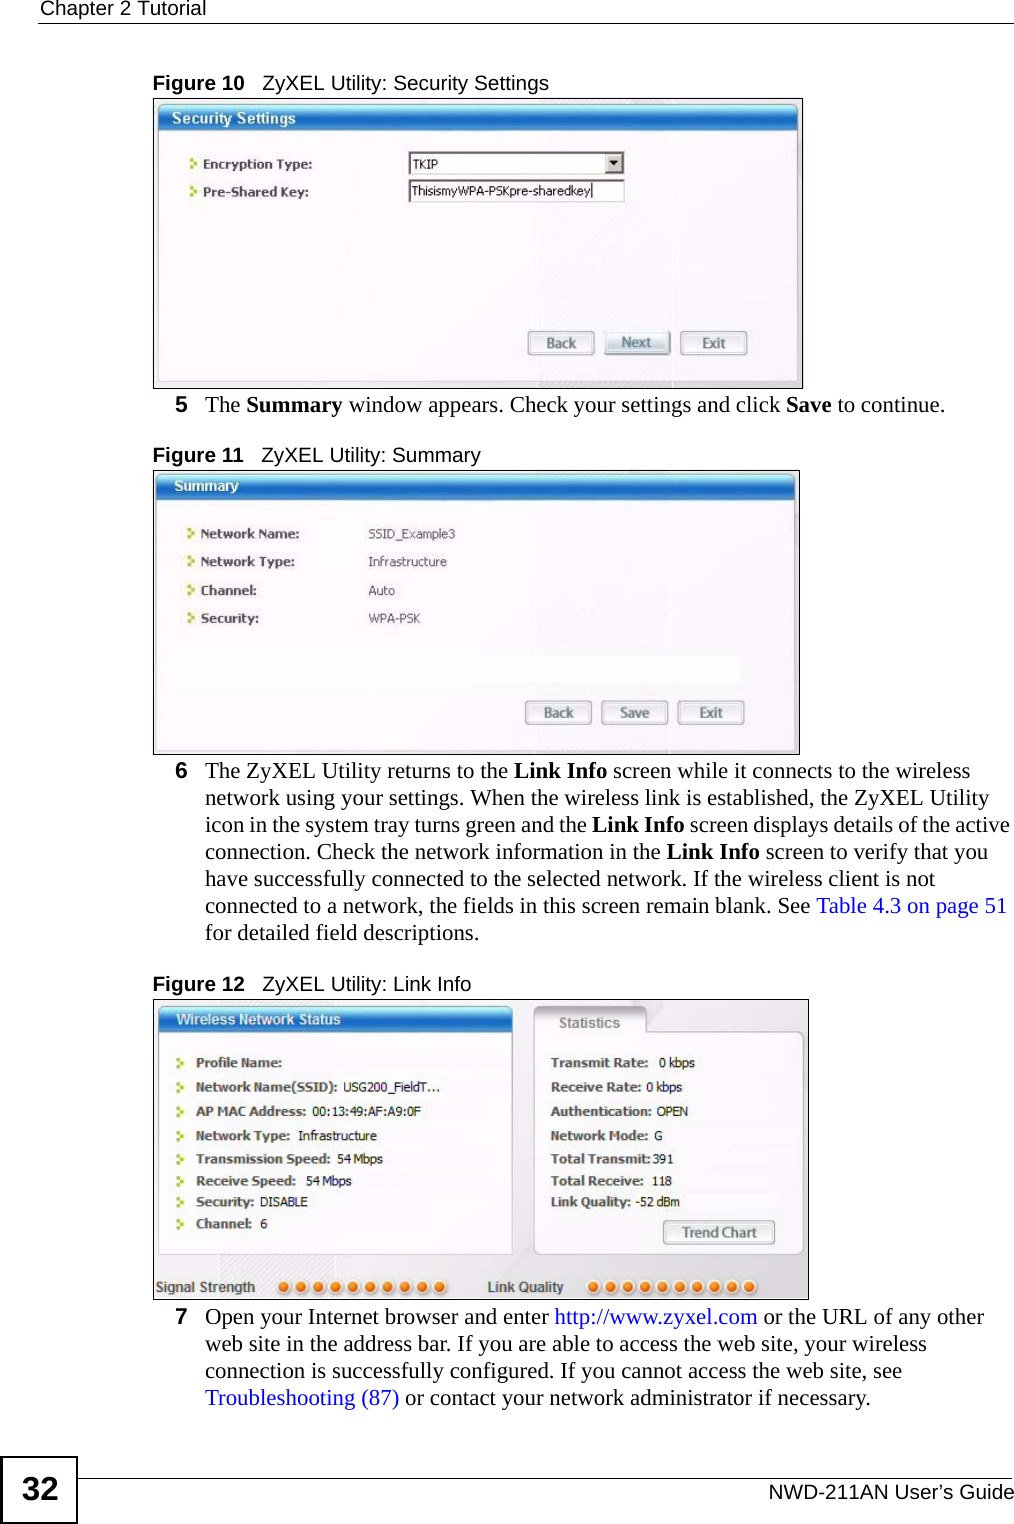 Chapter 2 TutorialNWD-211AN User’s Guide32Figure 10   ZyXEL Utility: Security Settings 5The Summary window appears. Check your settings and click Save to continue.Figure 11   ZyXEL Utility: Summary6The ZyXEL Utility returns to the Link Info screen while it connects to the wireless network using your settings. When the wireless link is established, the ZyXEL Utility icon in the system tray turns green and the Link Info screen displays details of the active connection. Check the network information in the Link Info screen to verify that you have successfully connected to the selected network. If the wireless client is not connected to a network, the fields in this screen remain blank. See Table 4.3 on page 51 for detailed field descriptions.Figure 12   ZyXEL Utility: Link Info 7Open your Internet browser and enter http://www.zyxel.com or the URL of any other web site in the address bar. If you are able to access the web site, your wireless connection is successfully configured. If you cannot access the web site, see Troubleshooting (87) or contact your network administrator if necessary.